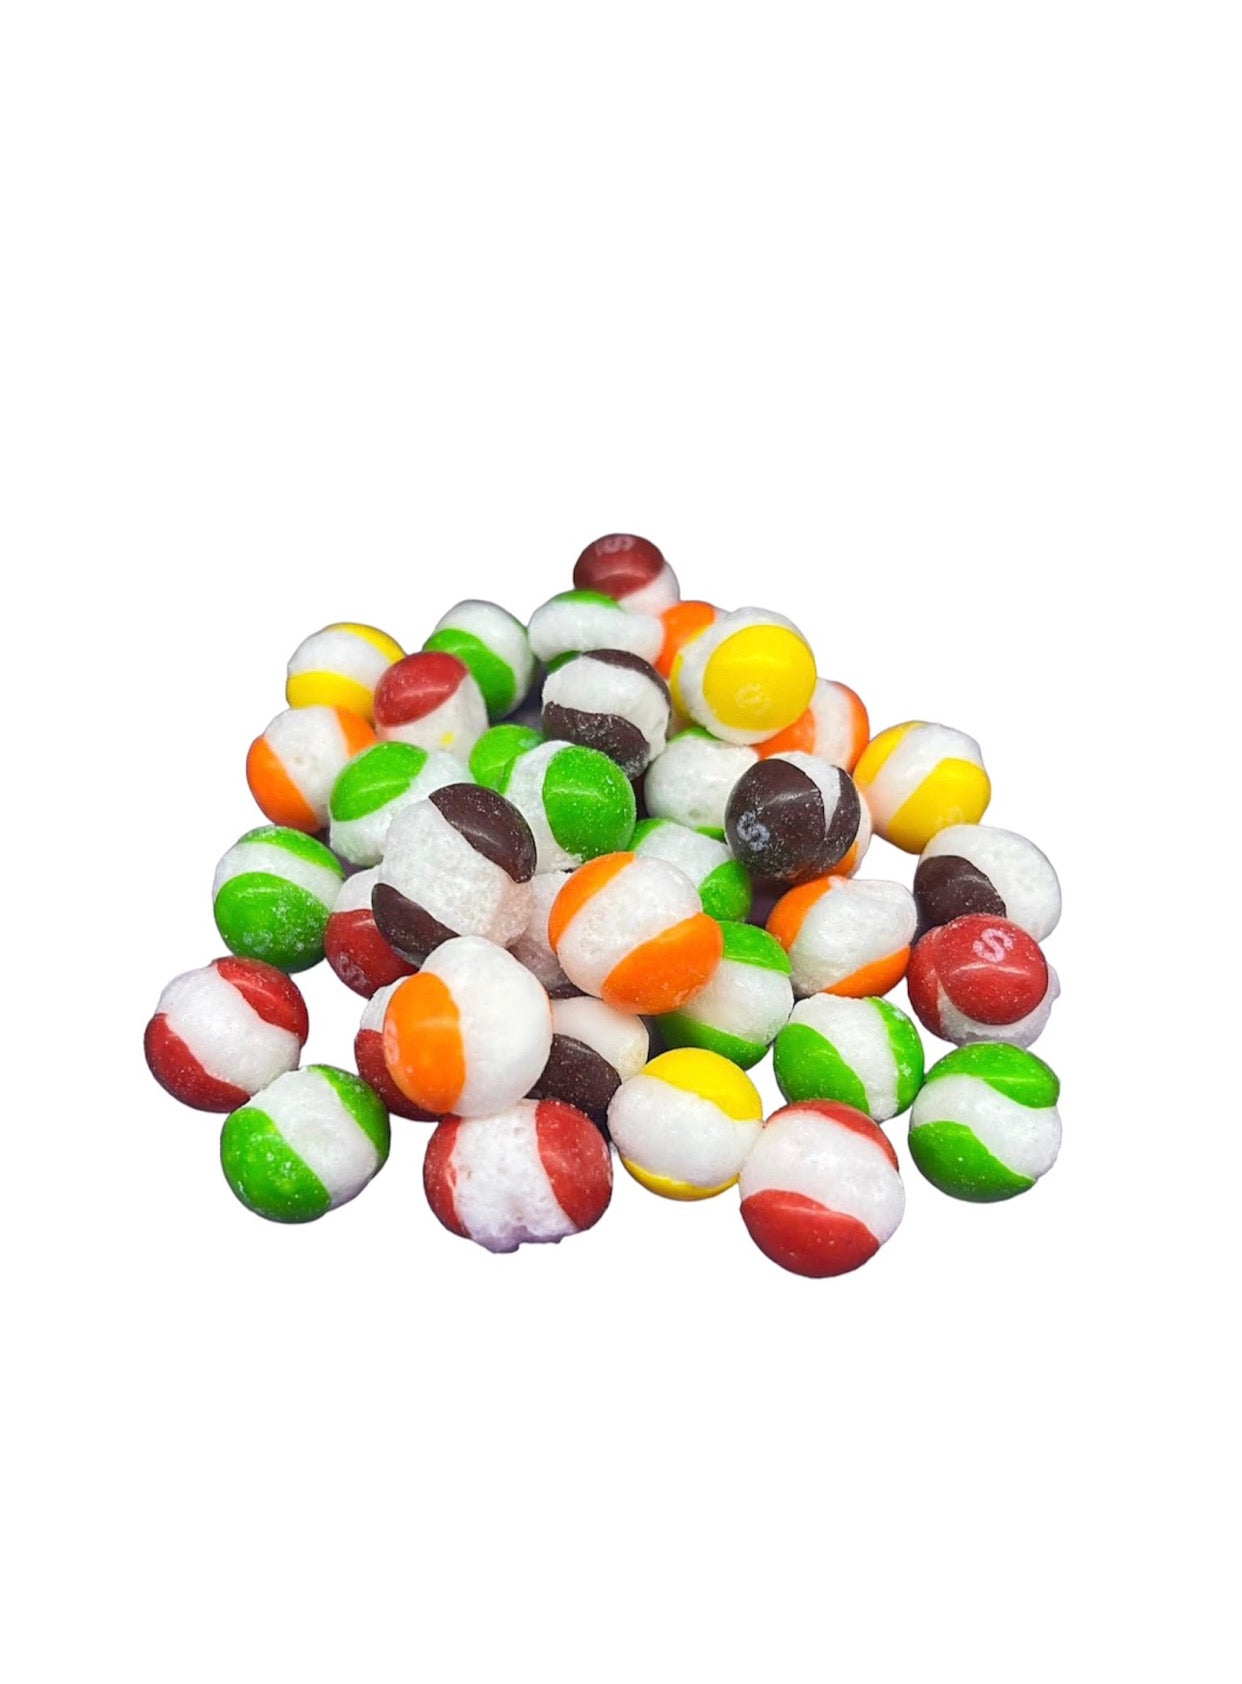 Skittle freeze dried